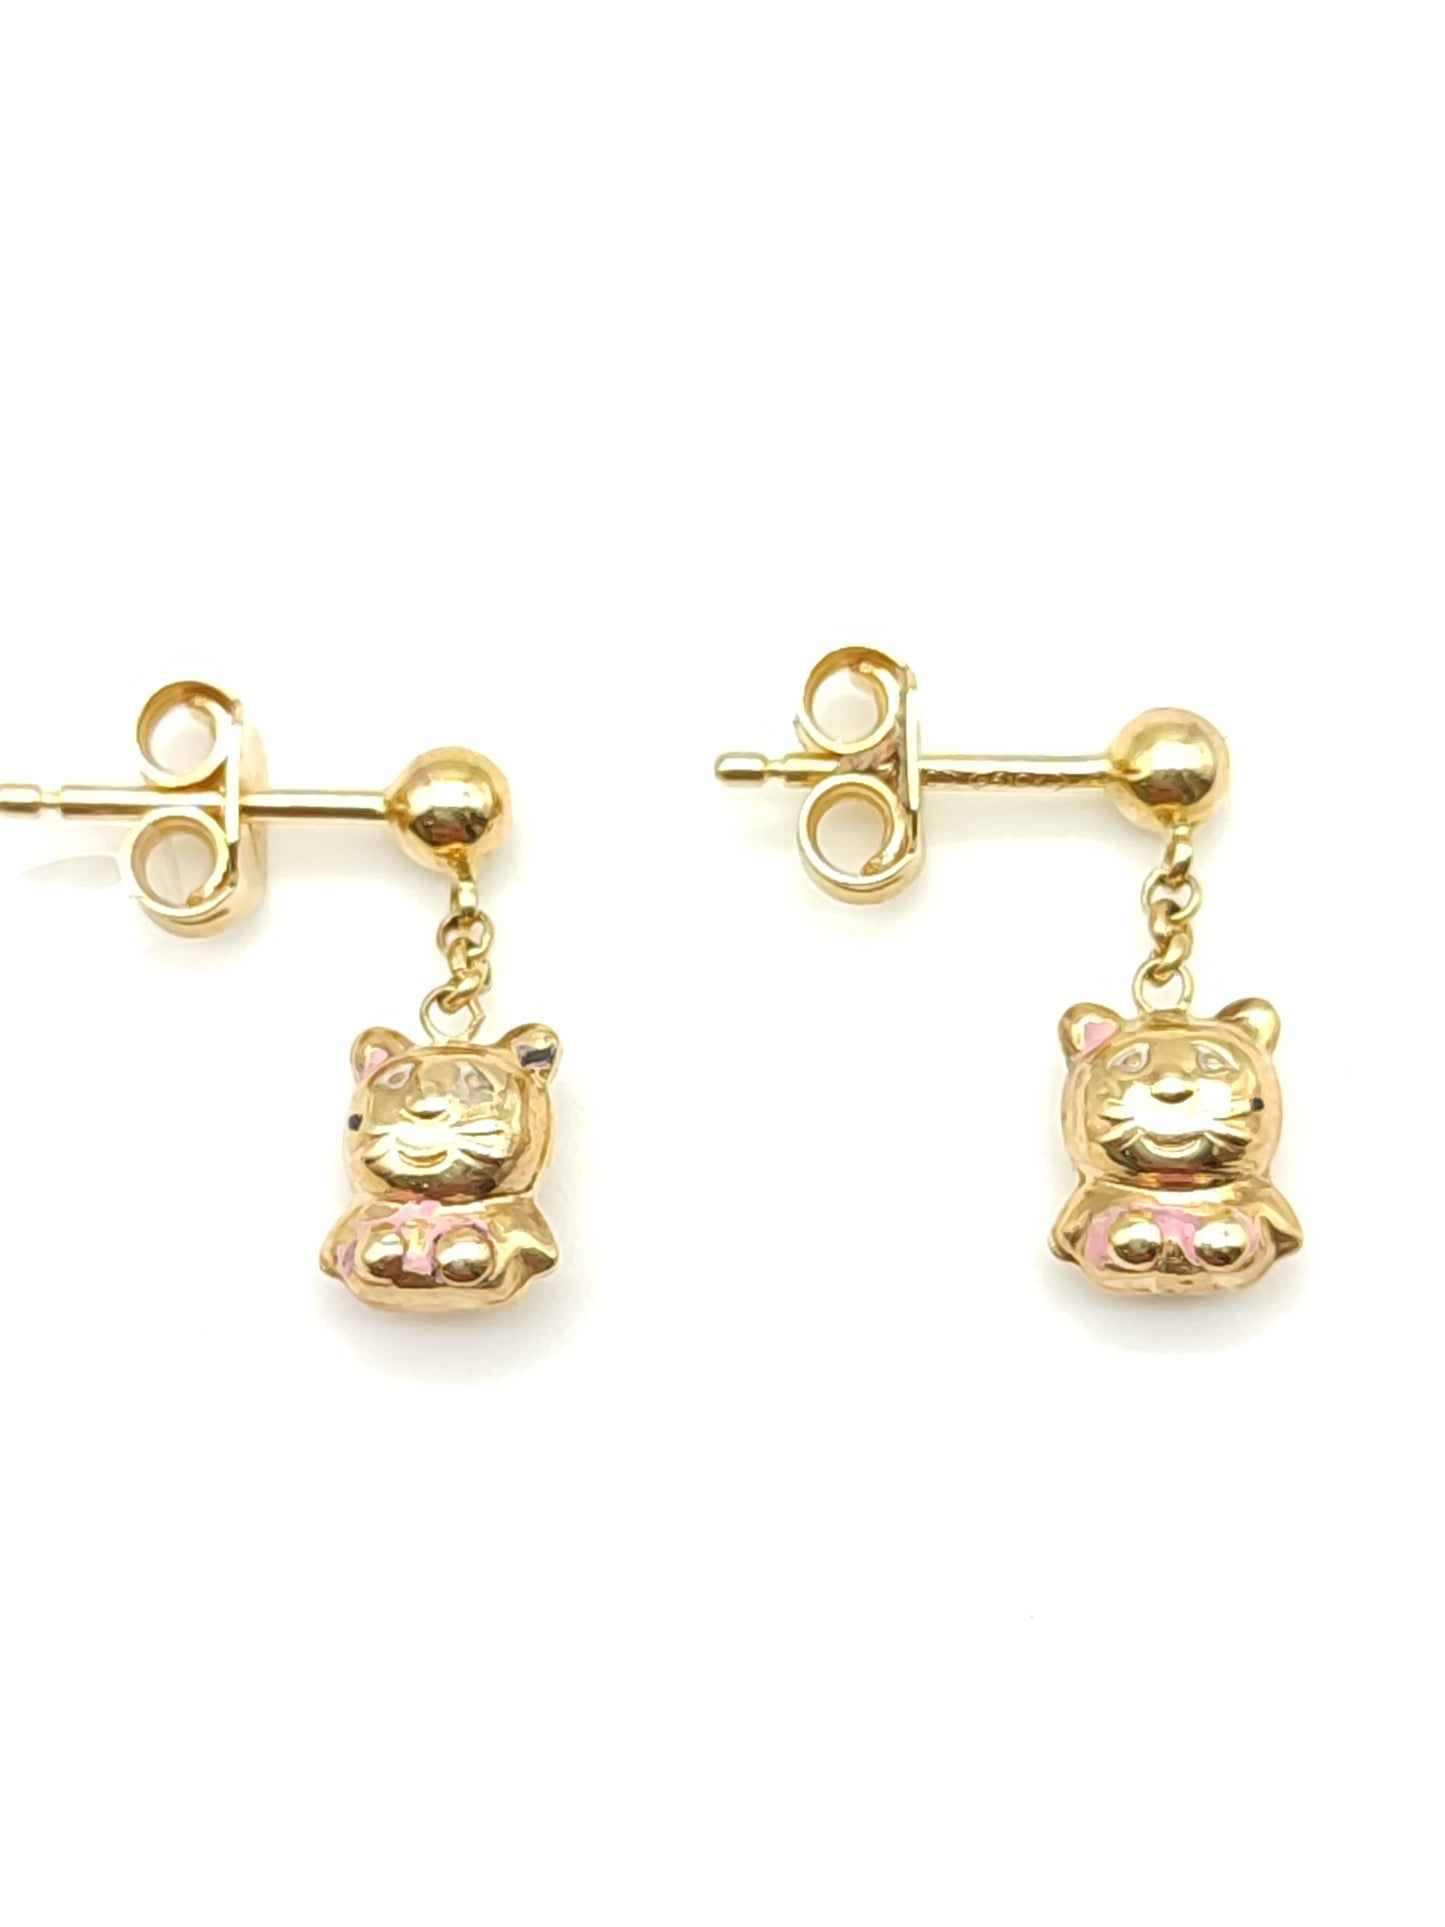 Gold earrings with hanging kitten